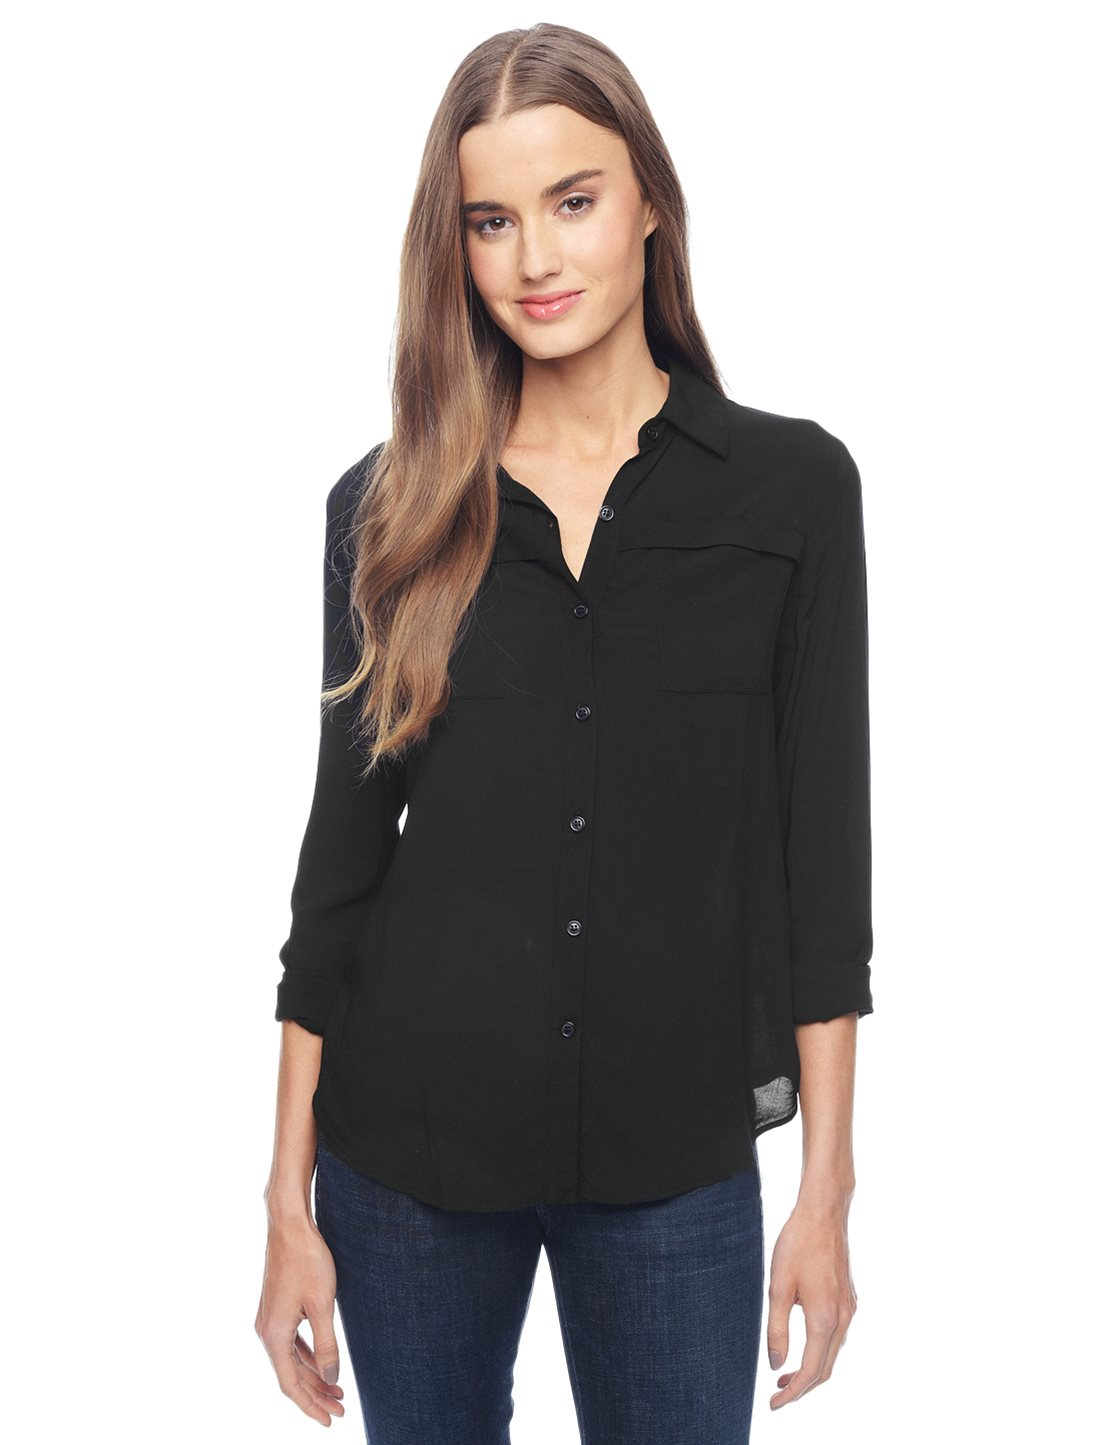 Splendid Rayon Voile Button Down Shirt in Black - Lyst